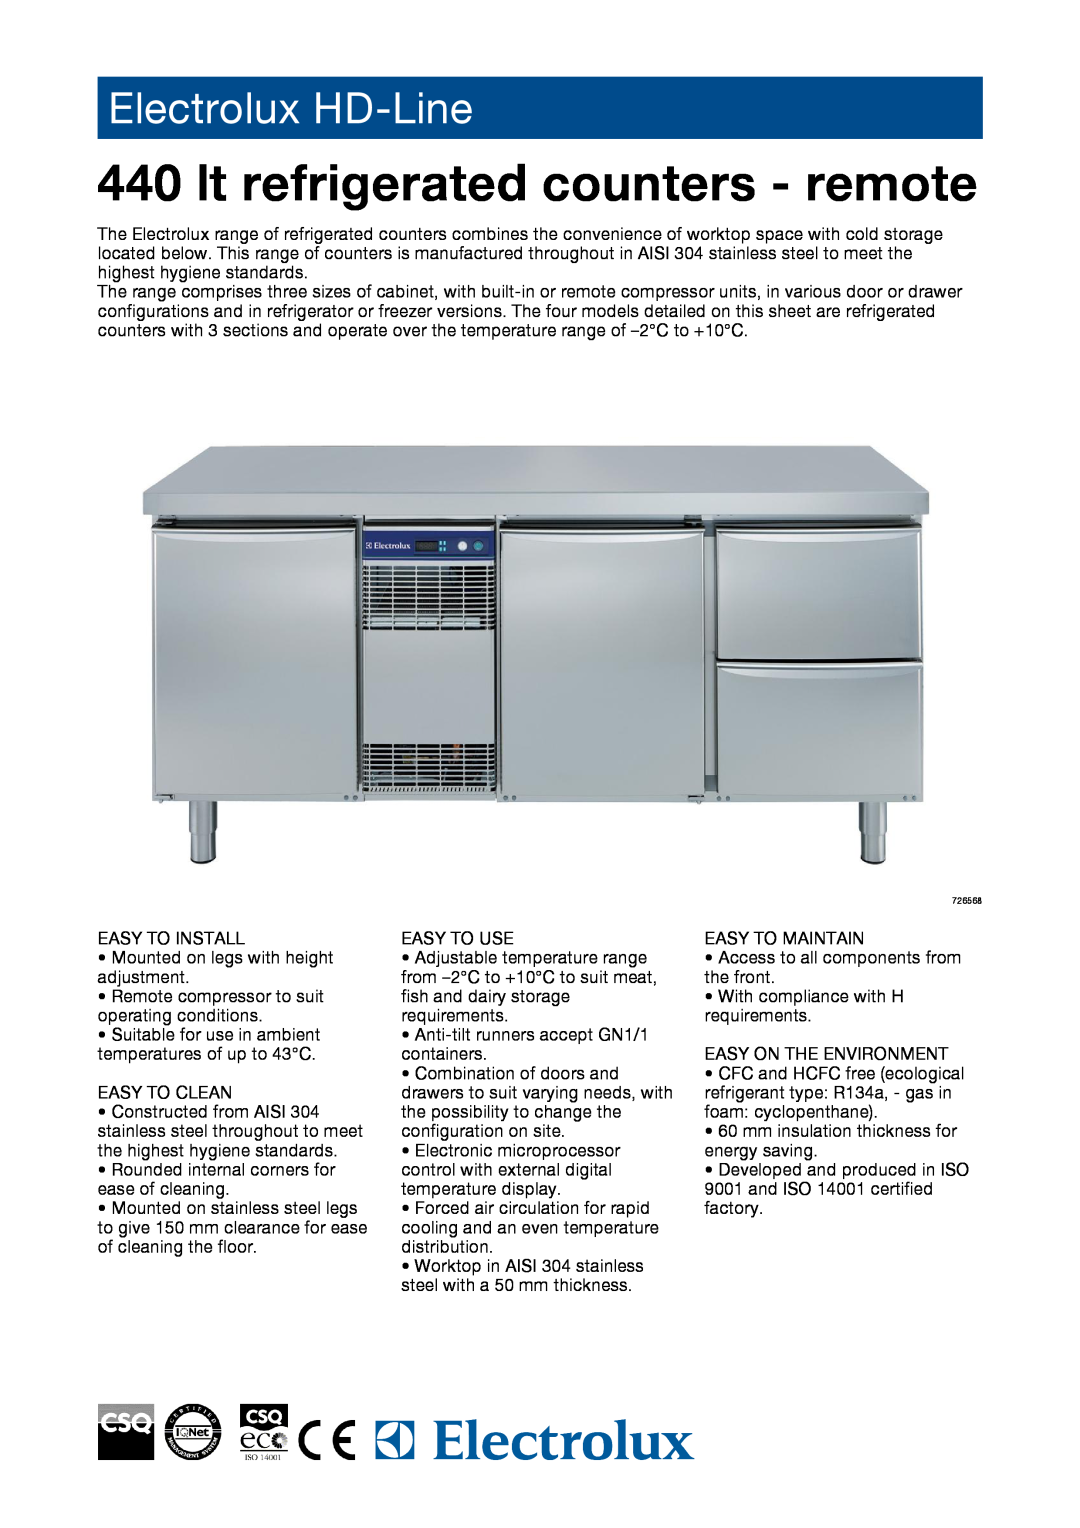 Electrolux 726568, 726570, 726567, 726569, RCDR3M22R, RCDR3M30R manual lt refrigerated counters - remote, Electrolux HD-Line 